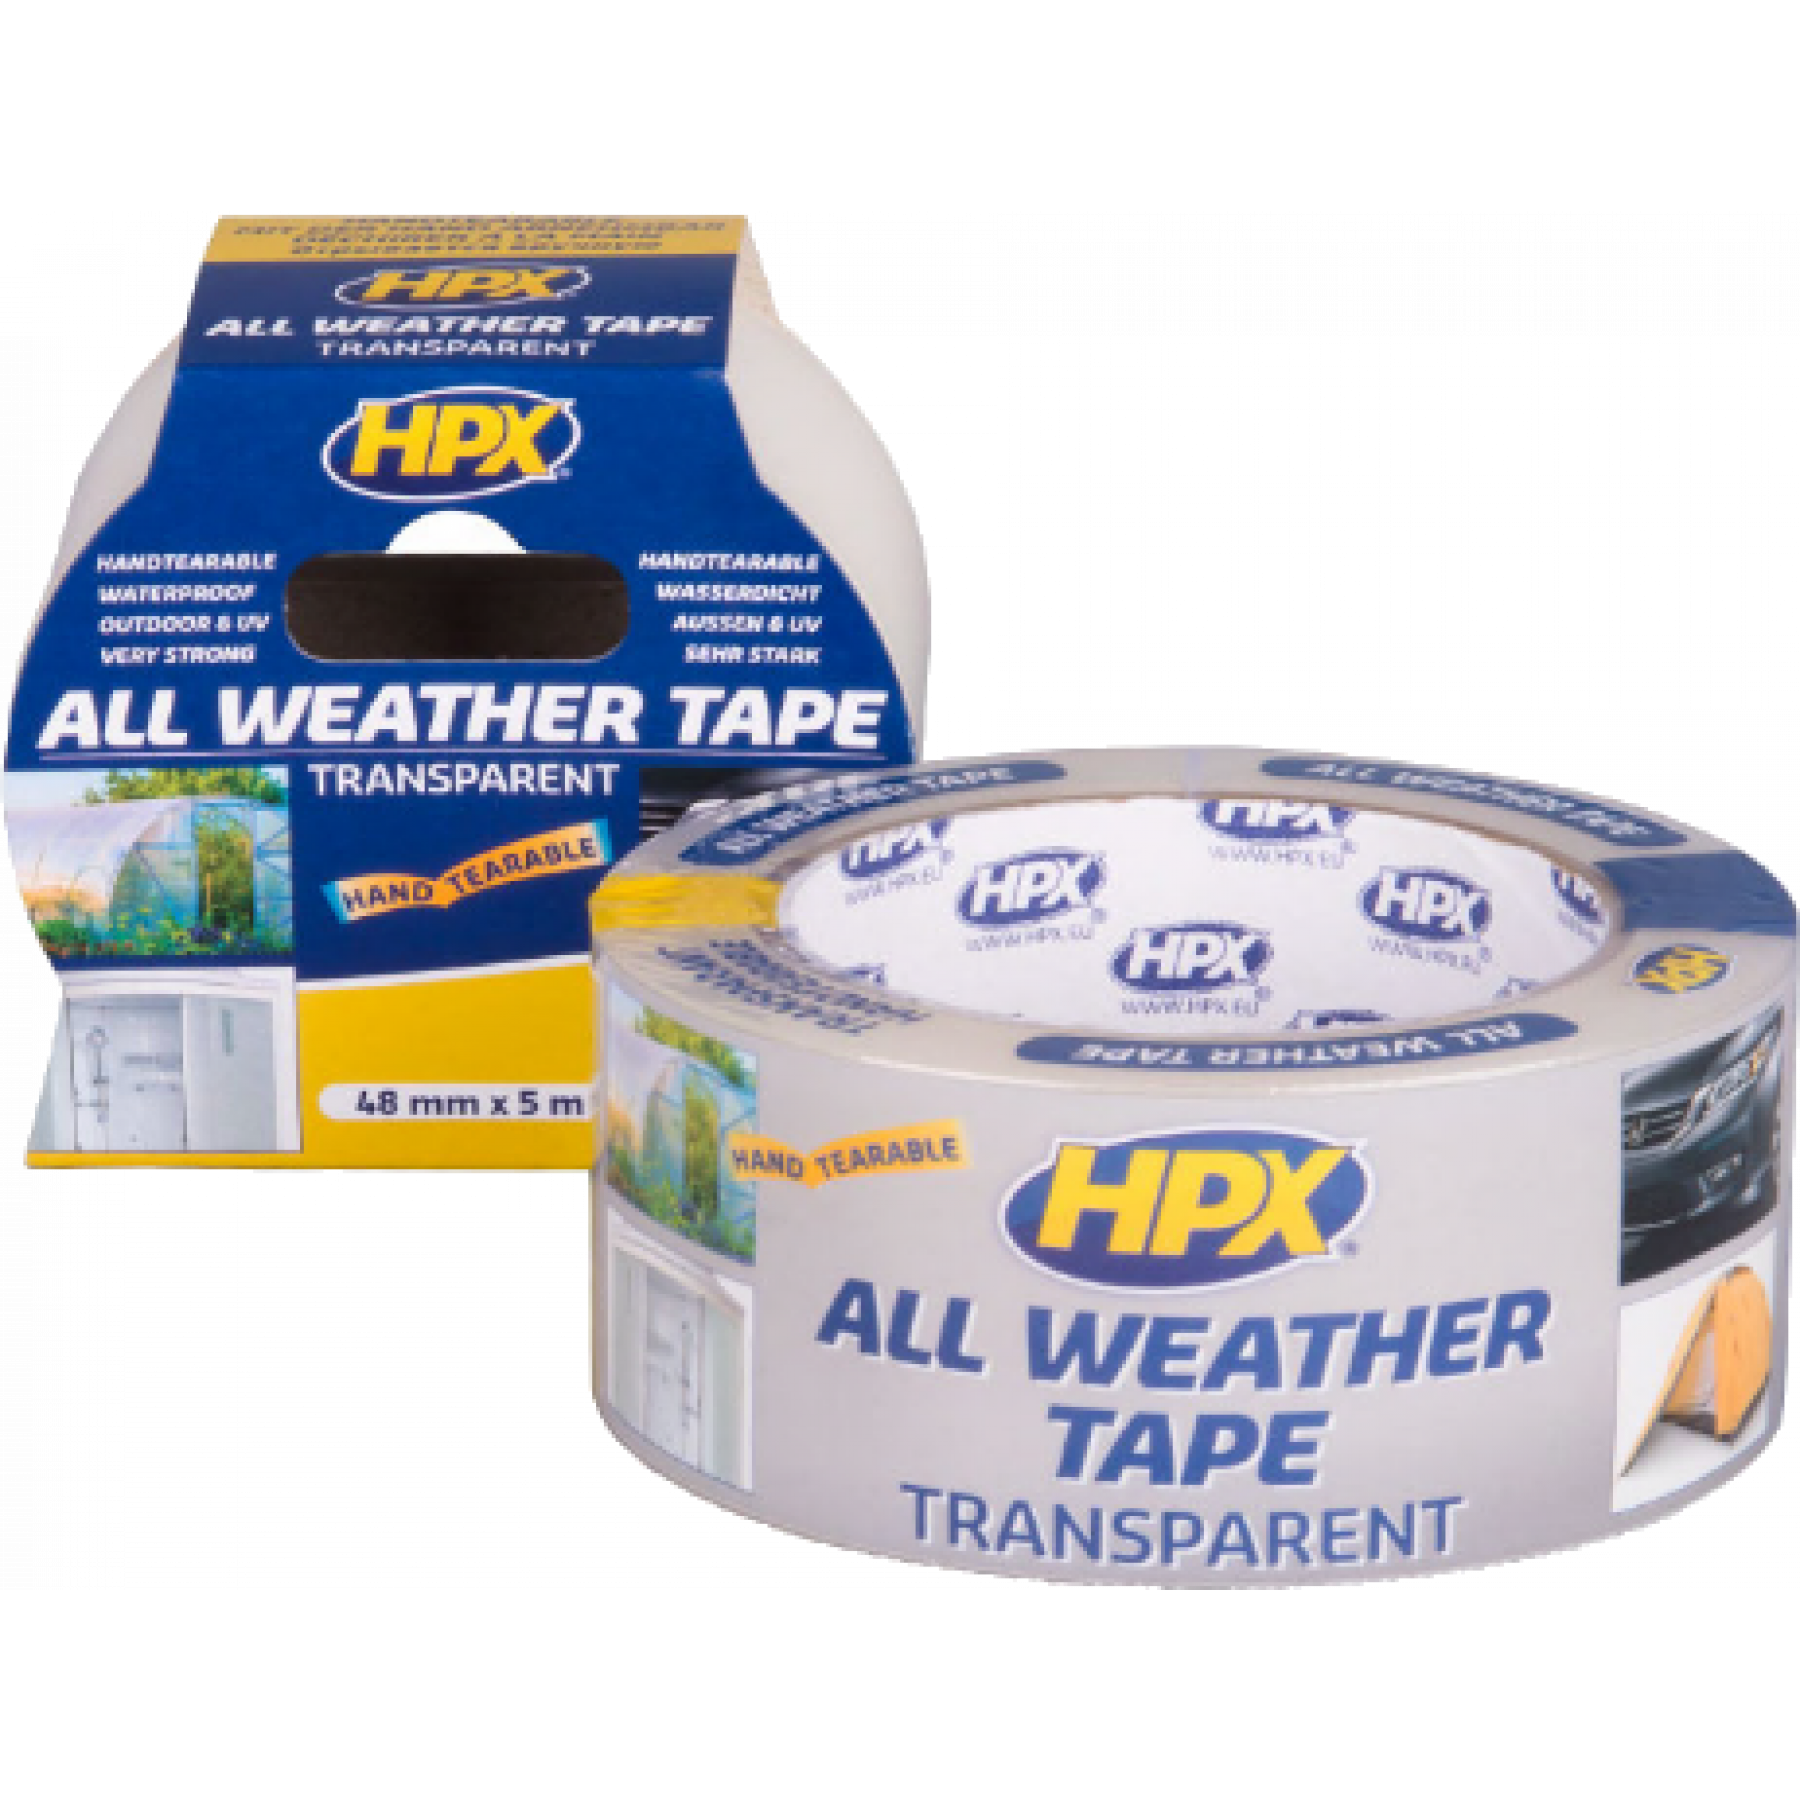 All weather tape 5m x 48mm